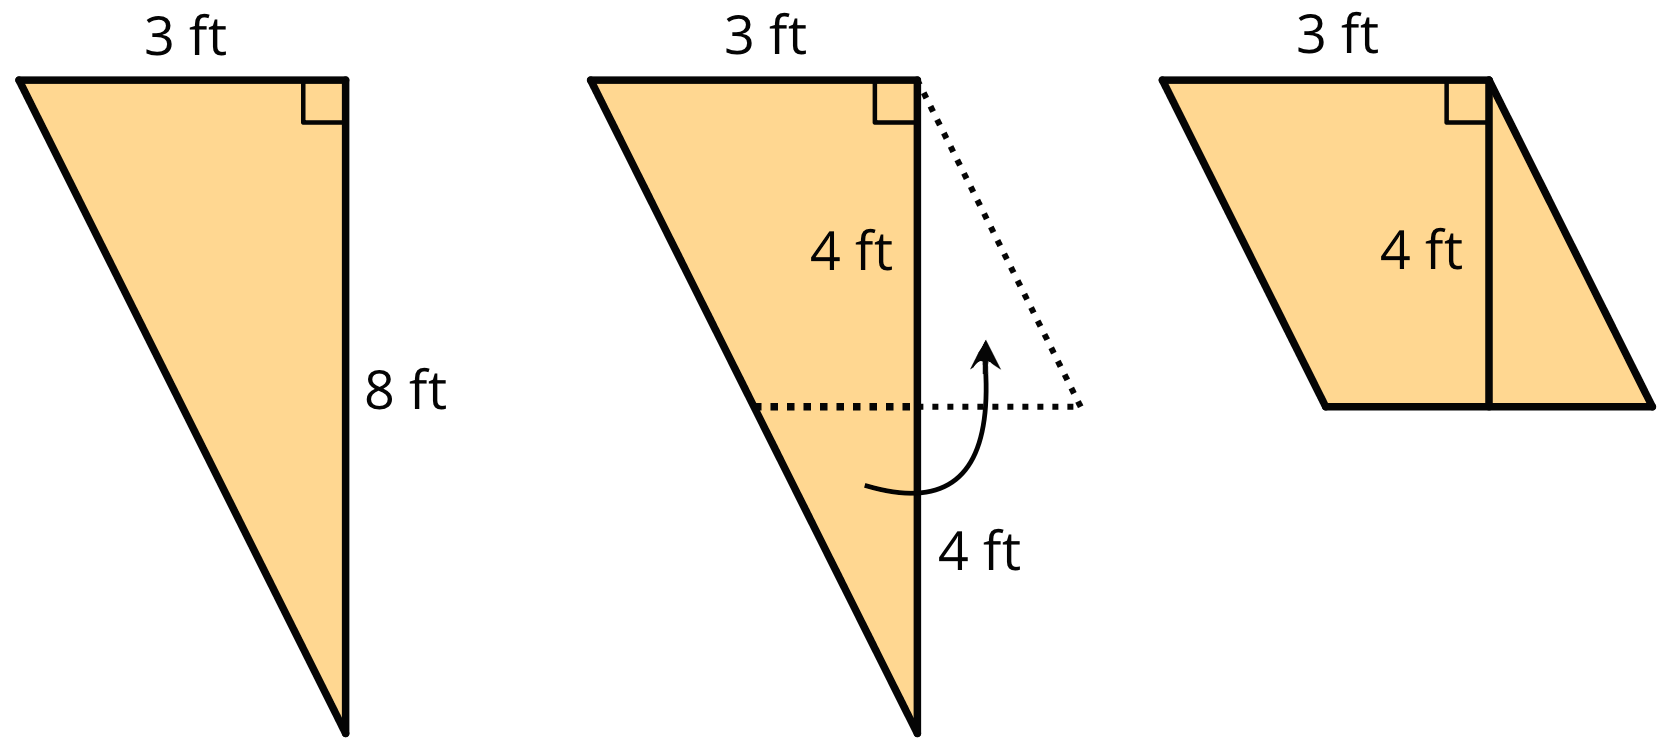 A triangle with one side labeled 3 feet and another side labeled 8 feet. A second image displays the same triangle with a dashed line bisecting the triangle so the side that was labeled 8 feet is now two pieces, each labeled 4 feet. An arrow indicates that the resulting smaller portion is rotated to create a parallelogram with a base of 3 feet and a height of 4 feet.